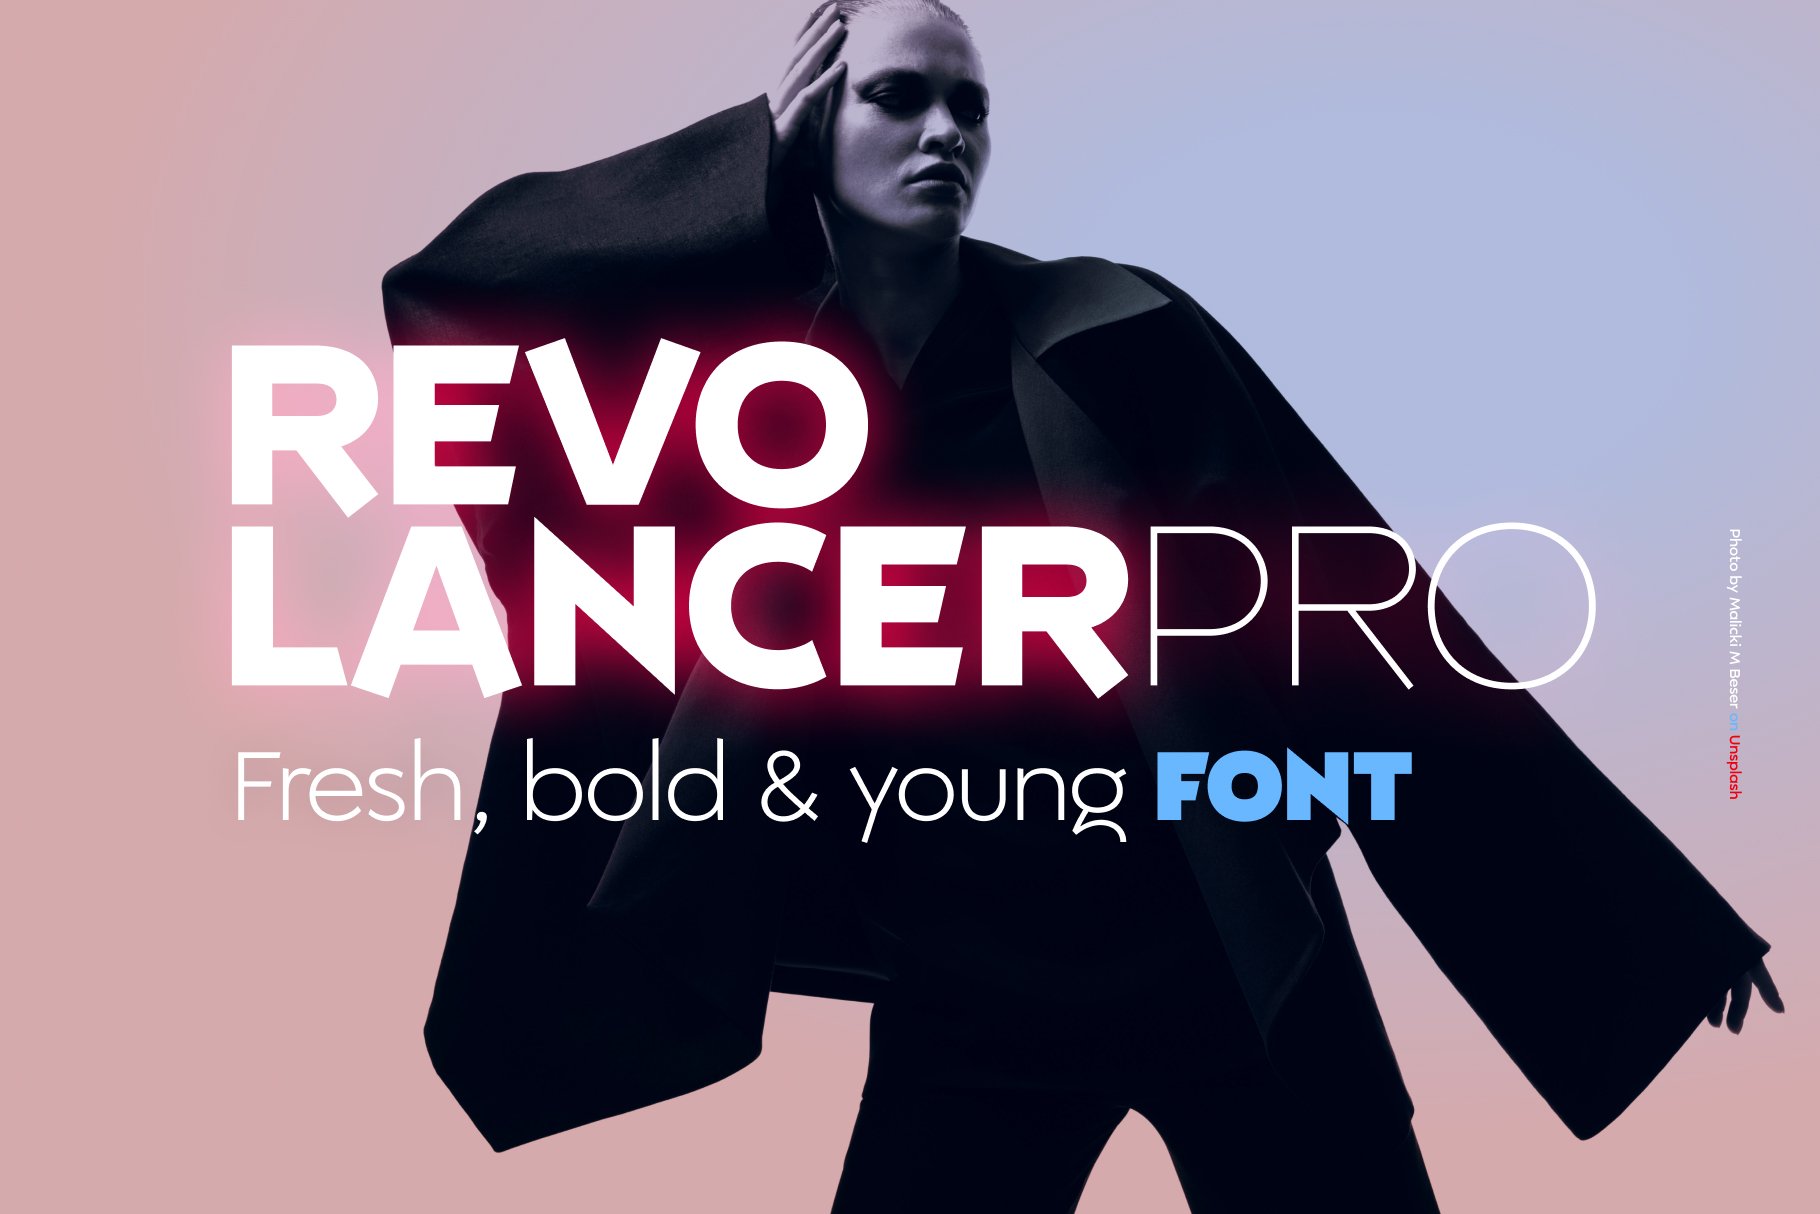 Fresh and Bold Revolancer Pro Font cover image.